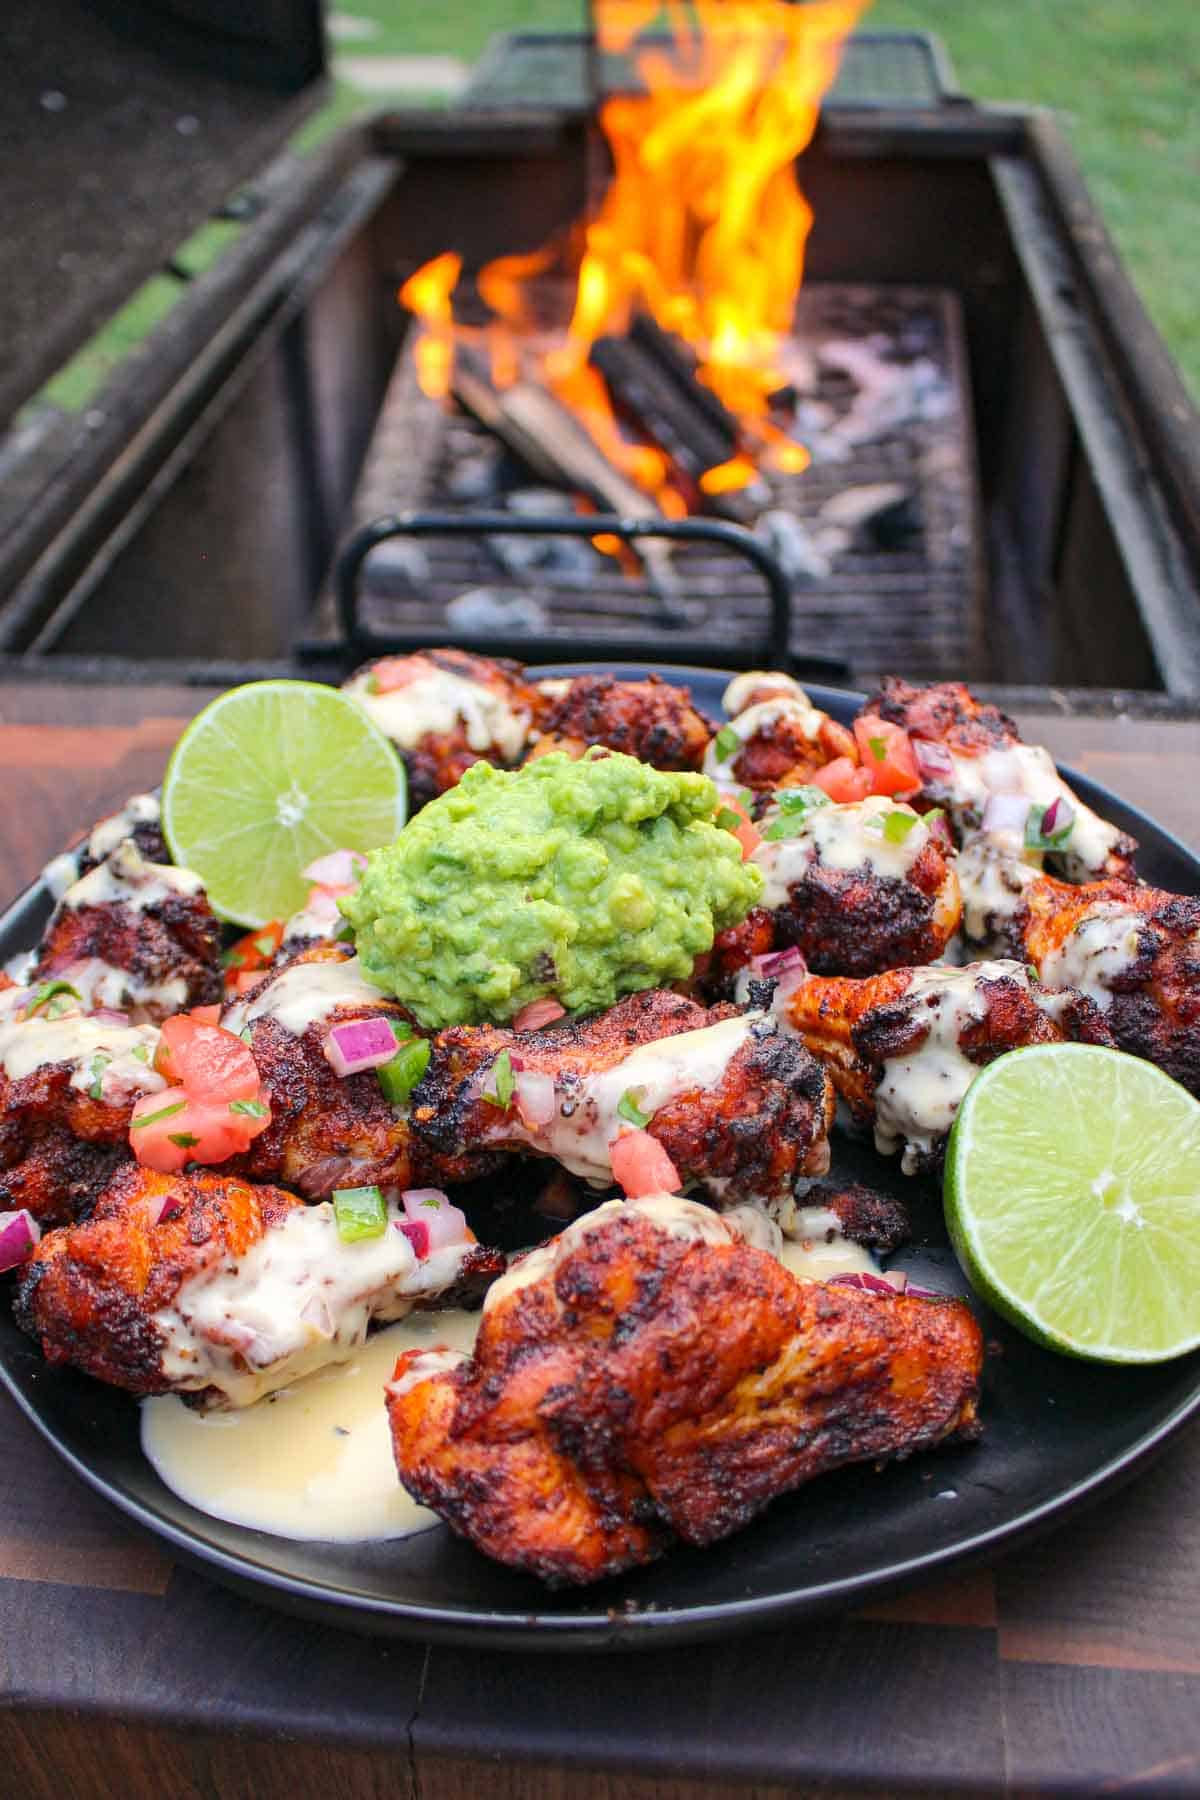 The Nacho Wings sitting on a serving plate.